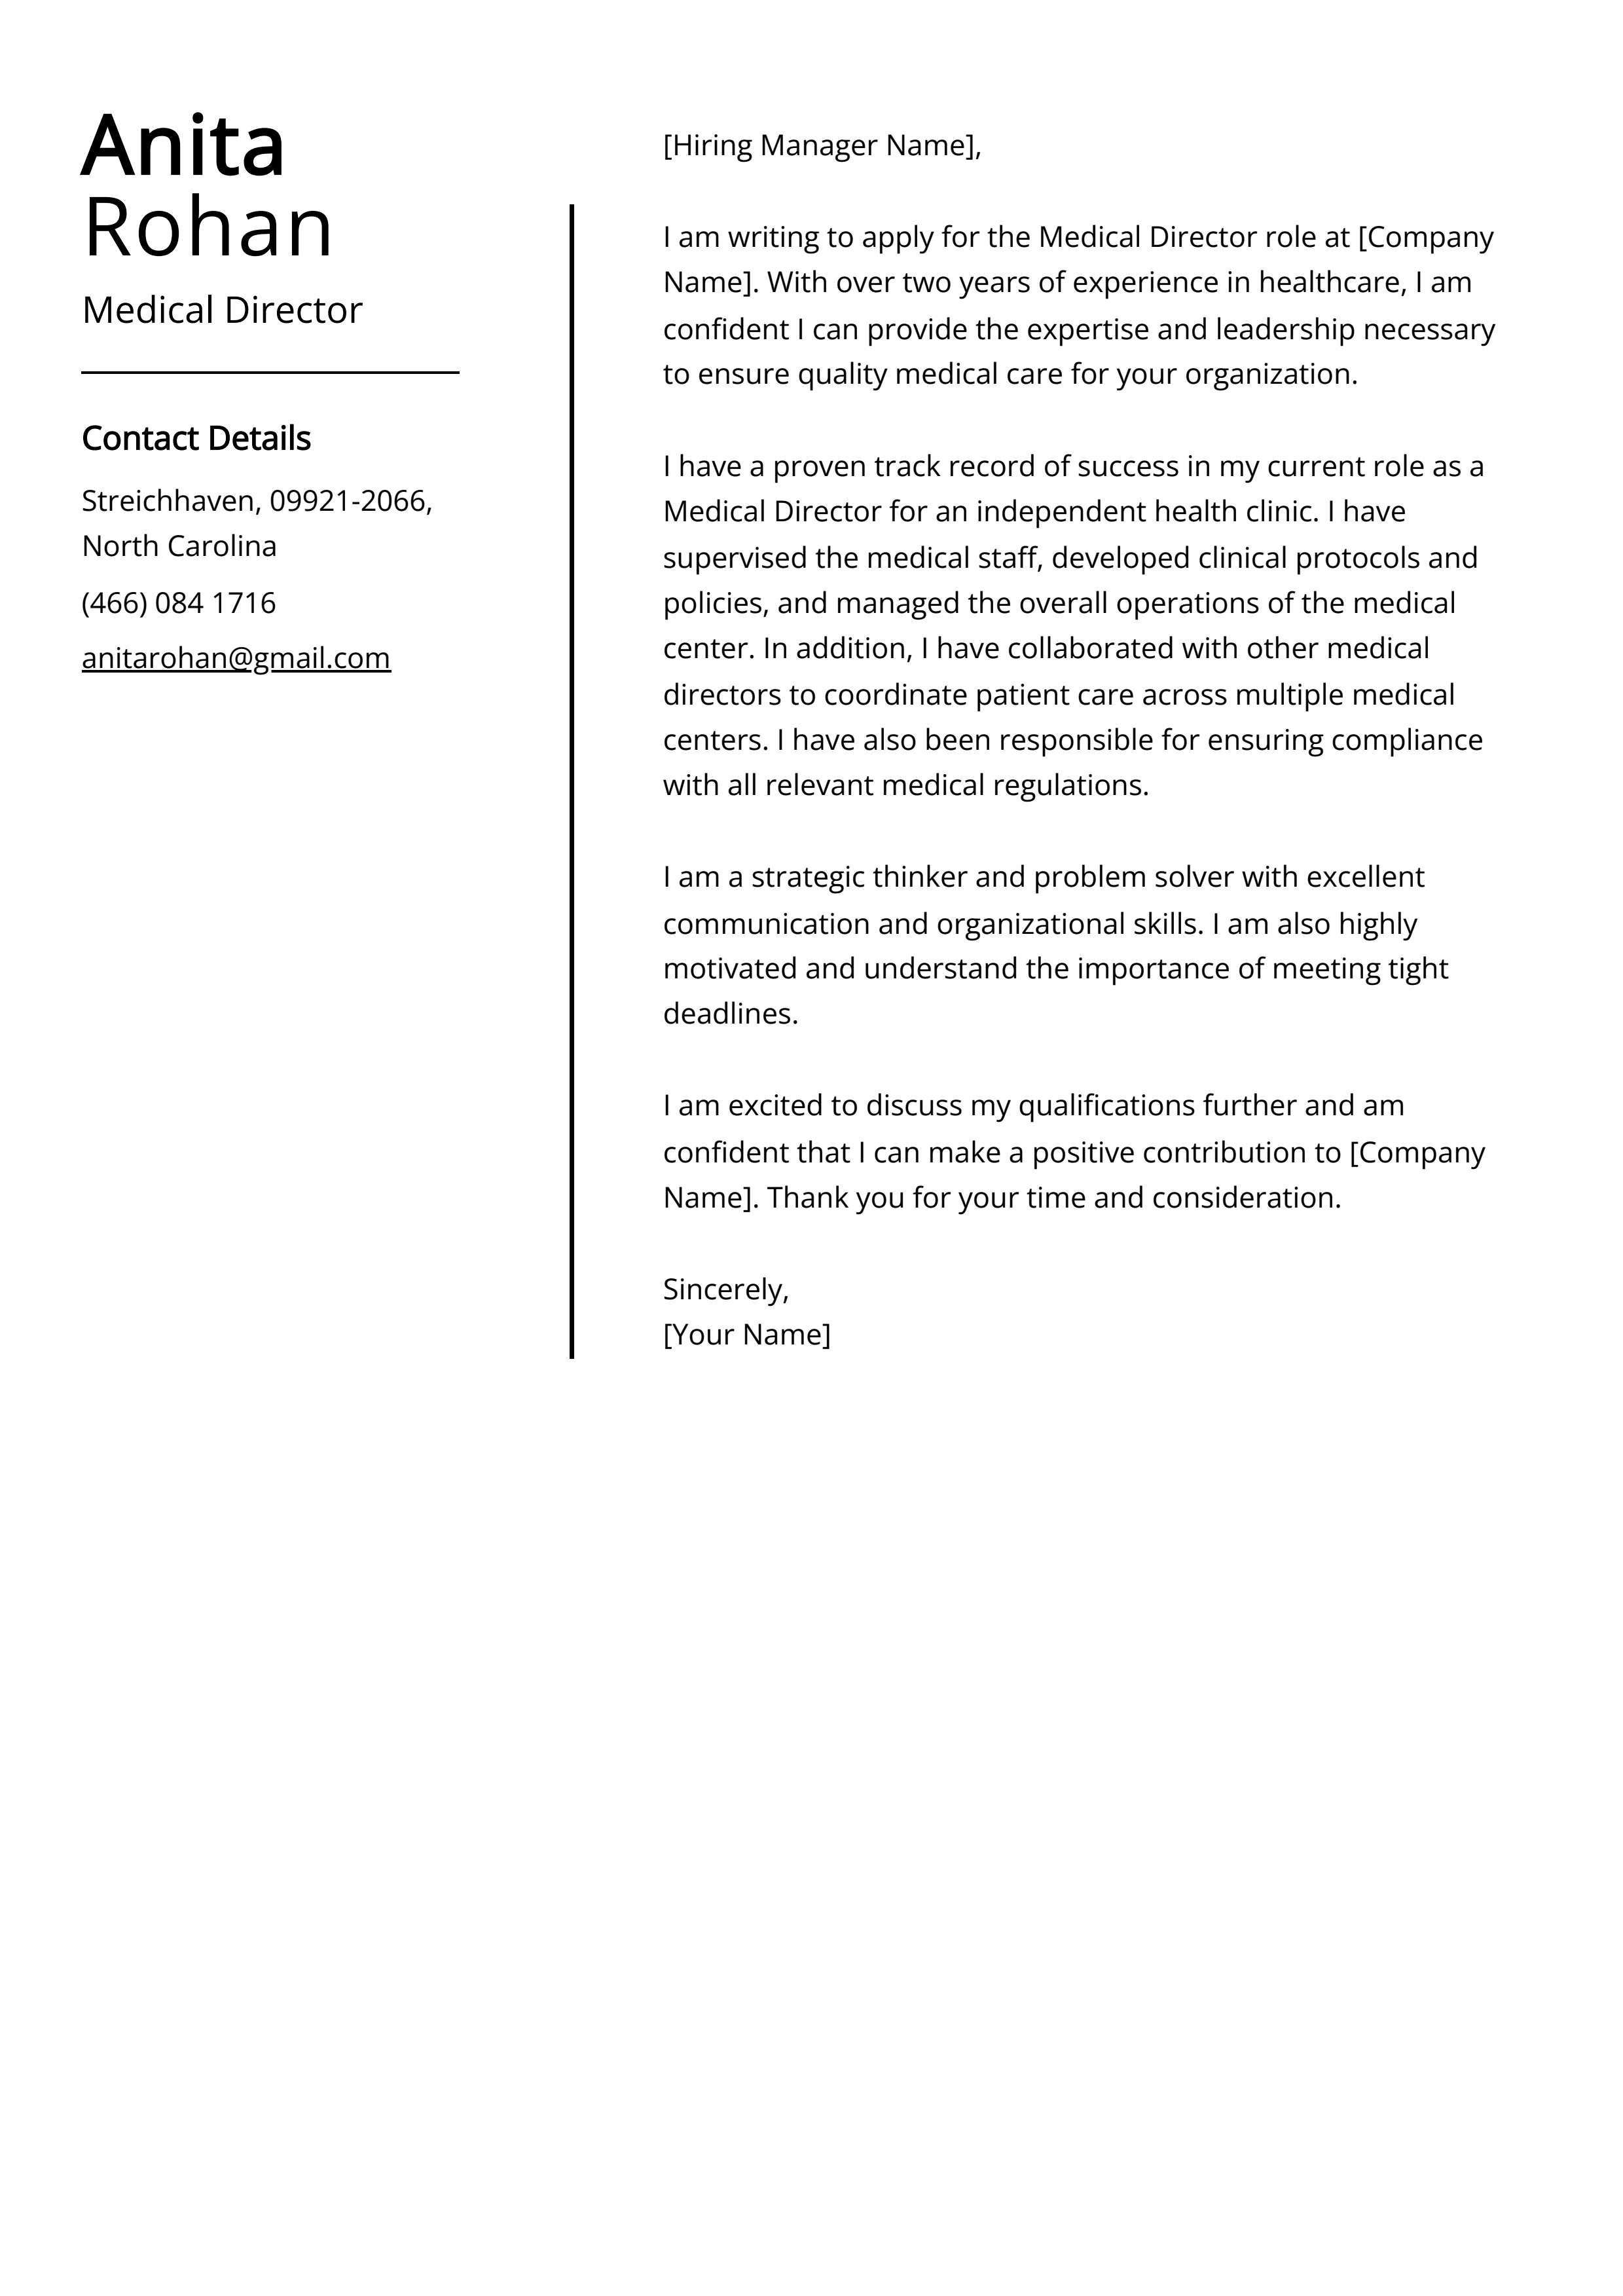 Medical Director Cover Letter Example